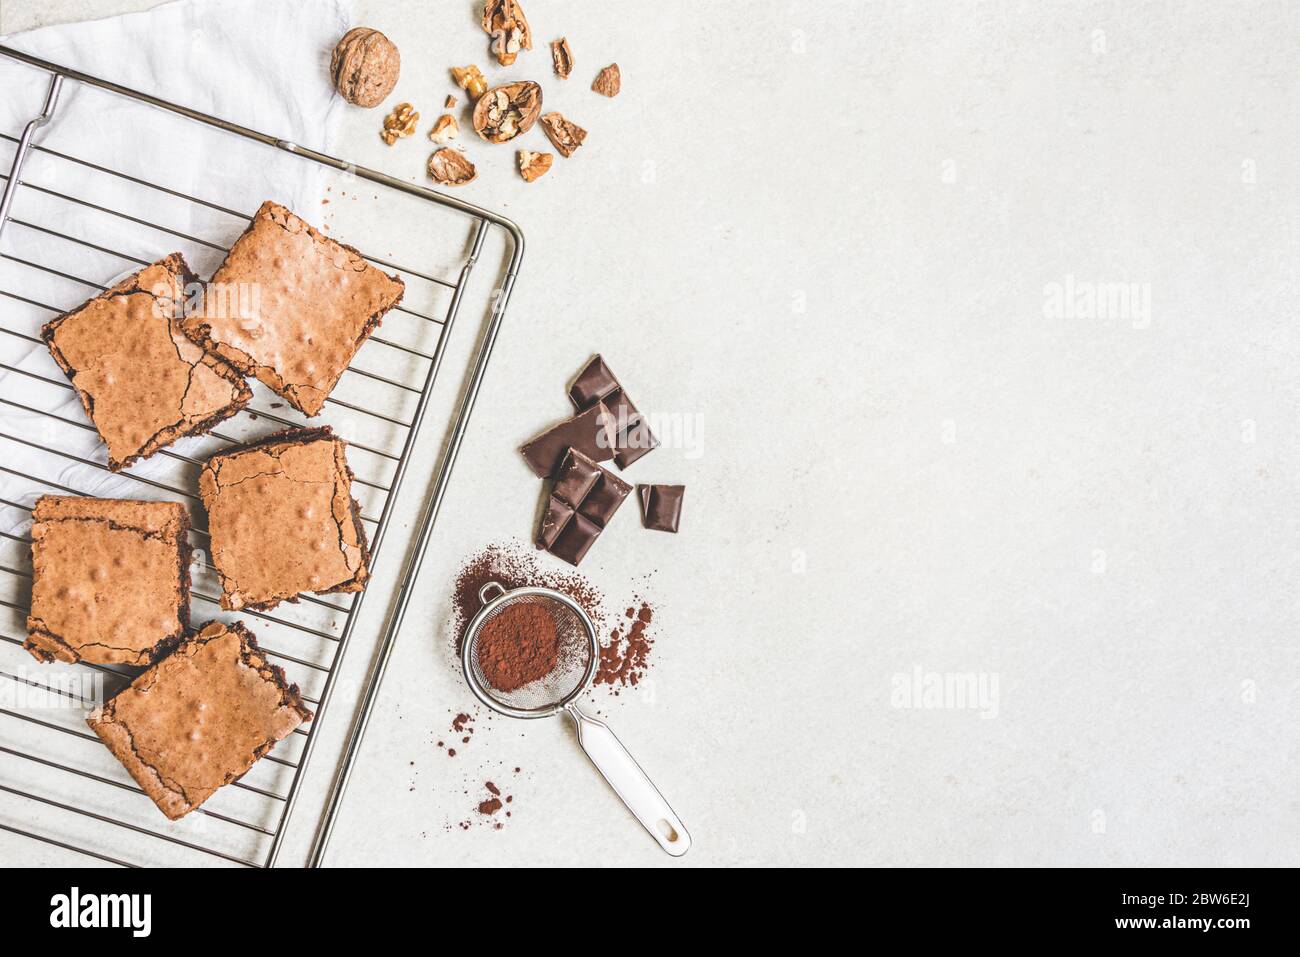 Top view of freshly baked home made brownie cake arranged with recipe ingredients over white rustic background. Copy space. Stock Photo